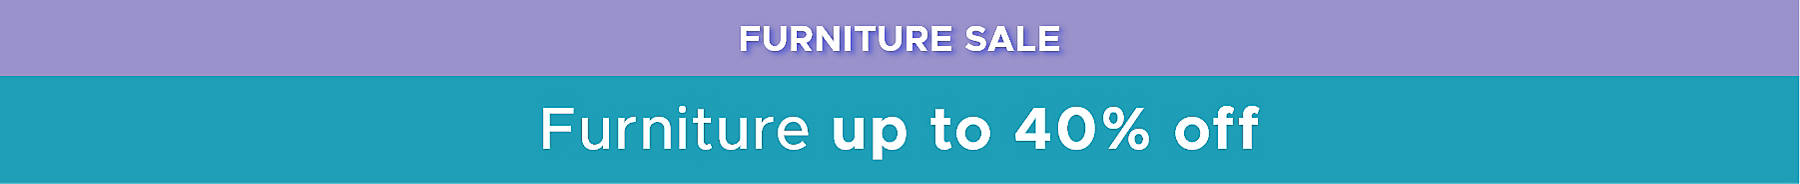 Furniture Sale Furniture up to 40% off